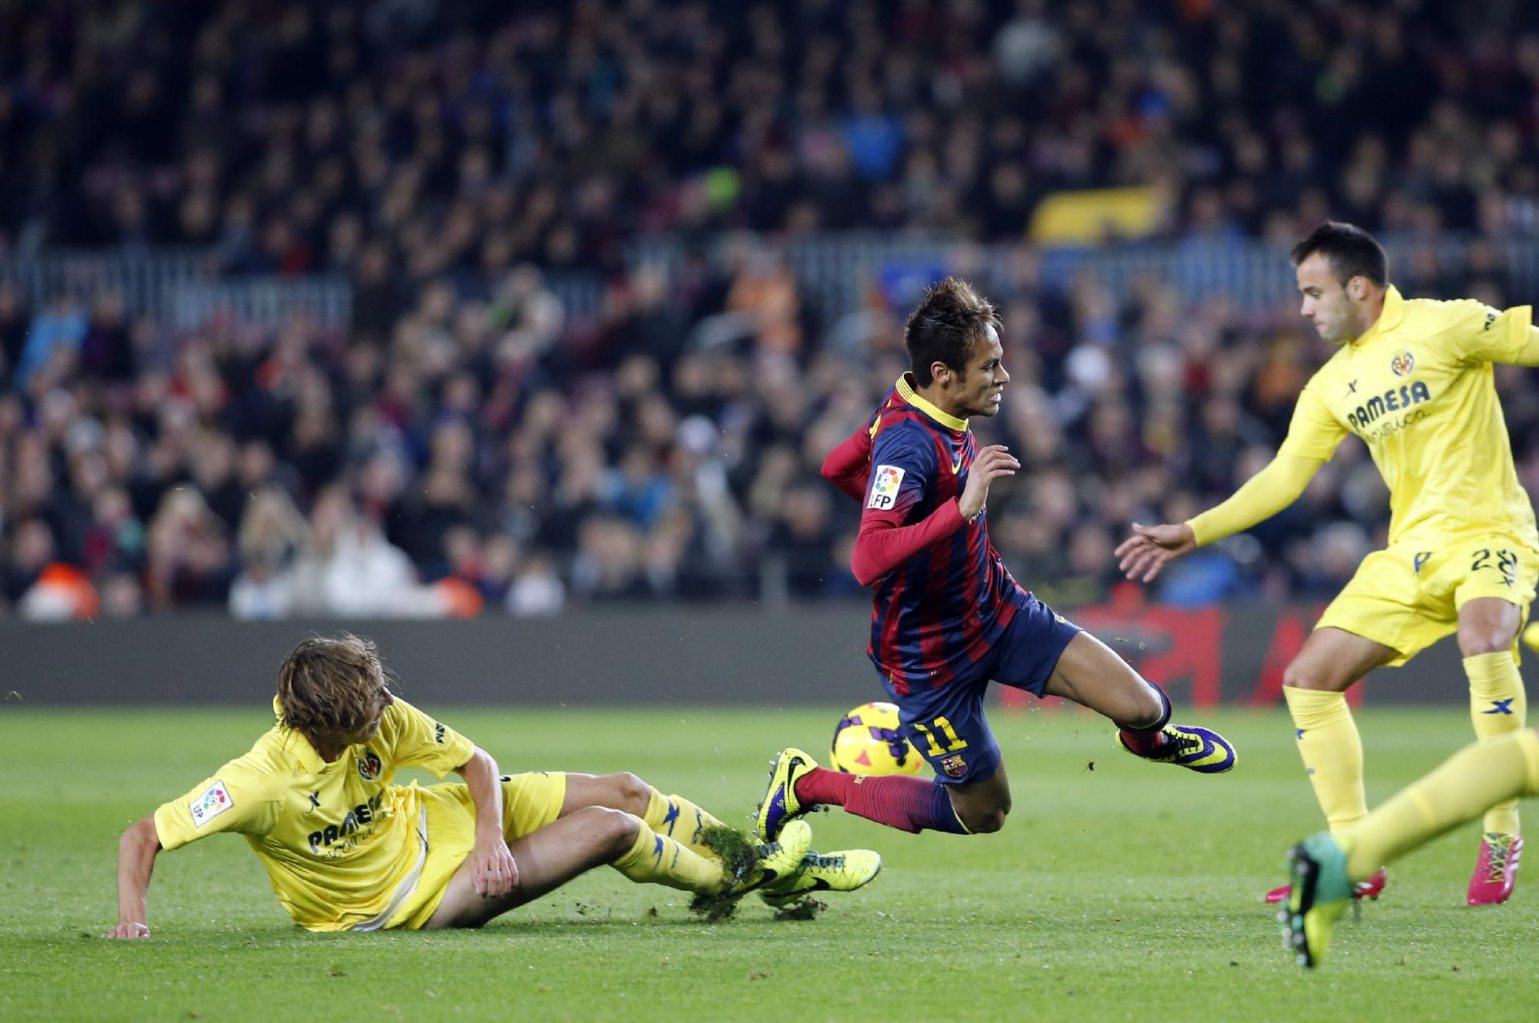 Neymar being tackled from behind, in Barcelona vs Villarreal